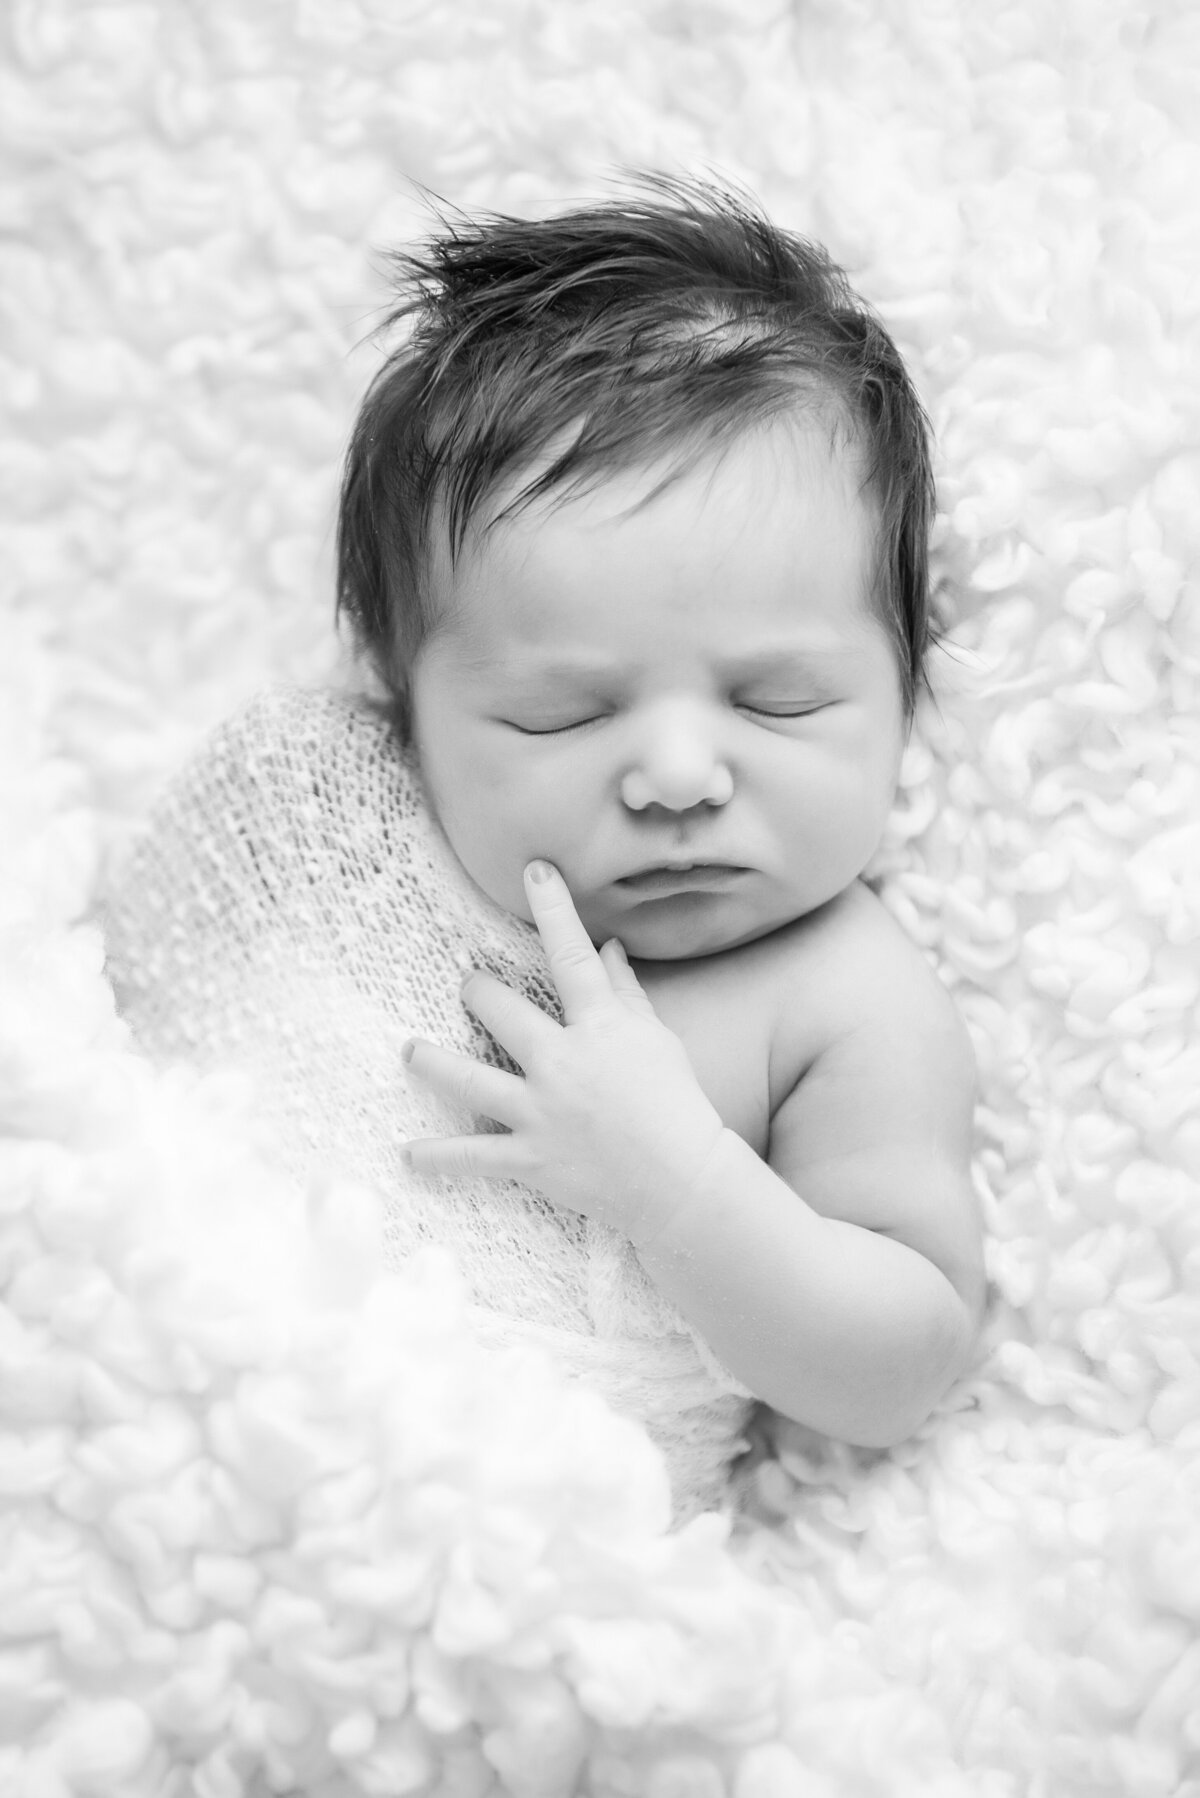 Newborn baby girl portrait in black and white natural